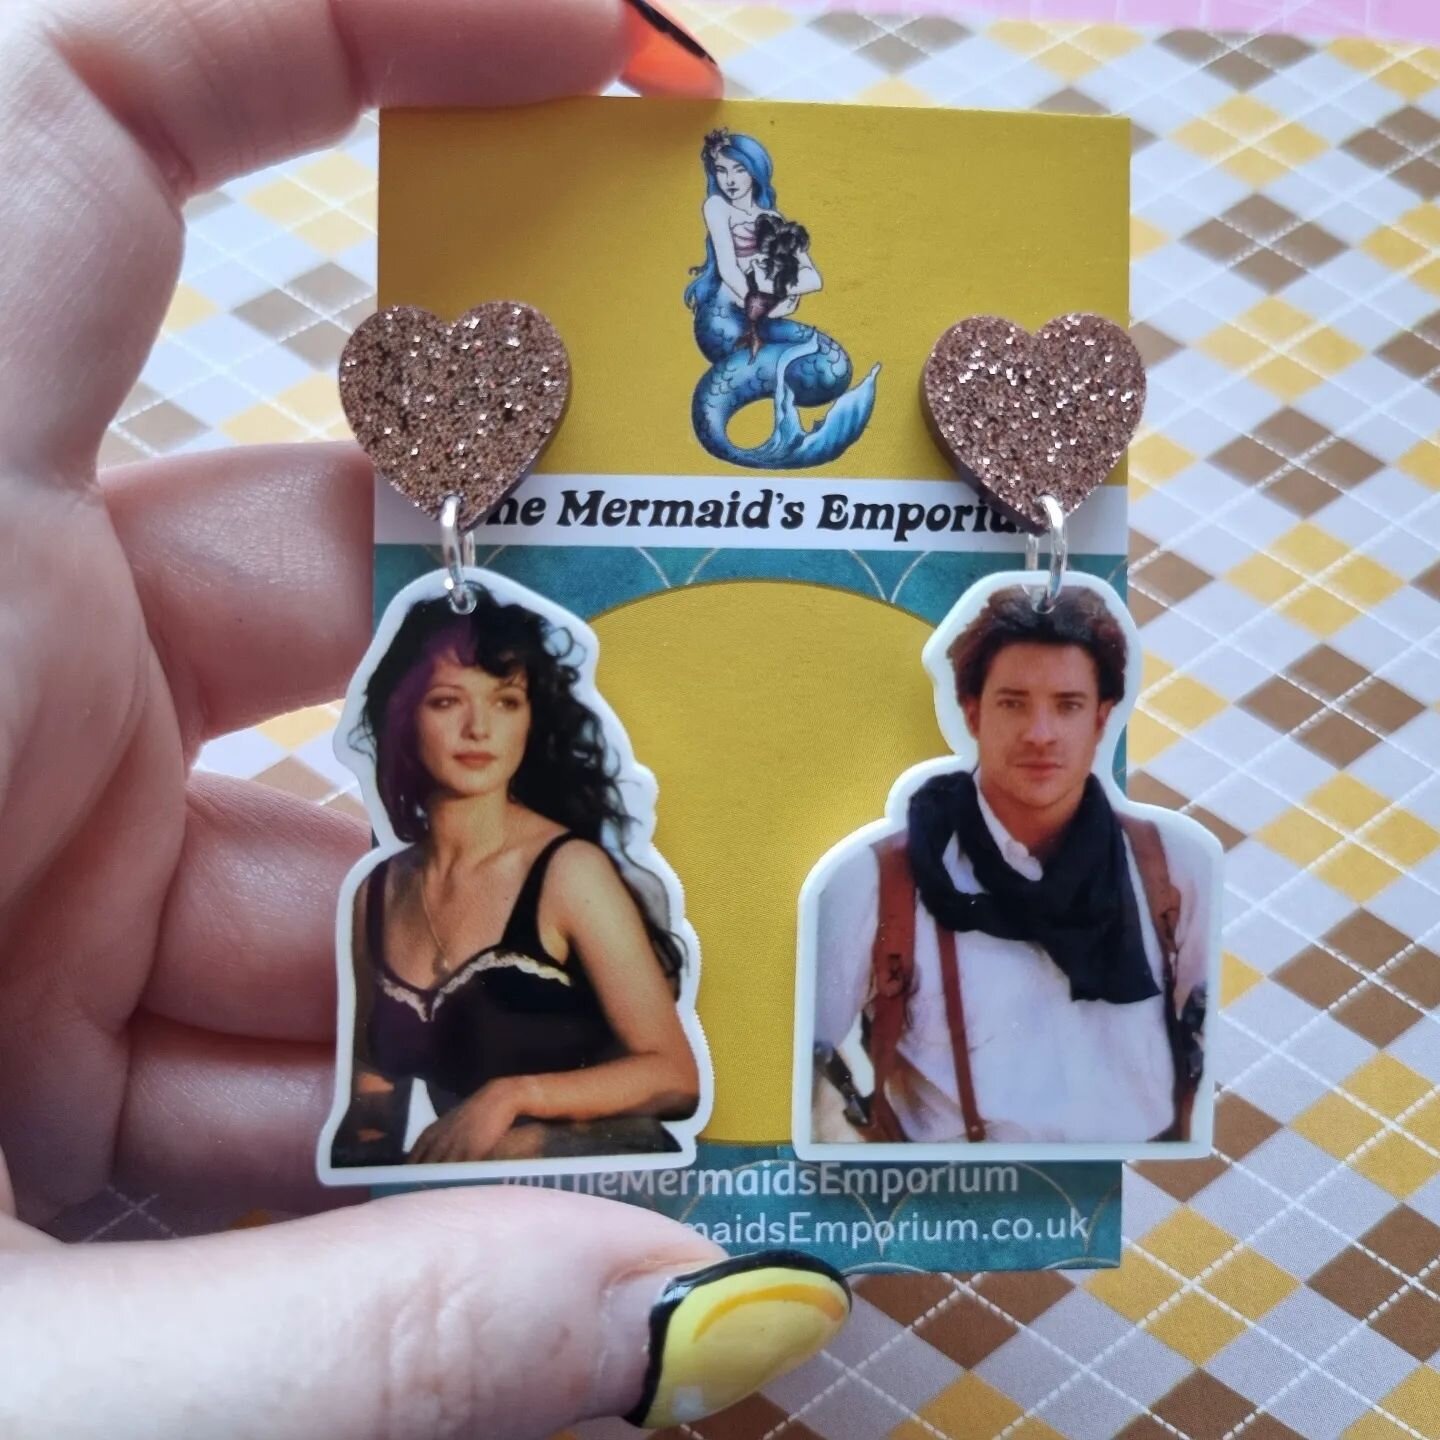 Rick and Evelyn - The Mummy Earrings... So excited about these ones!!
.
..
#themummy #themummyreturns #themummy1999 #themummy2017 #themummytrilogy #brendanfraser #brendanfraserforever #rachelweisz #rickandevelyn #pinup #burlesque #Rockabilly #kitsch 